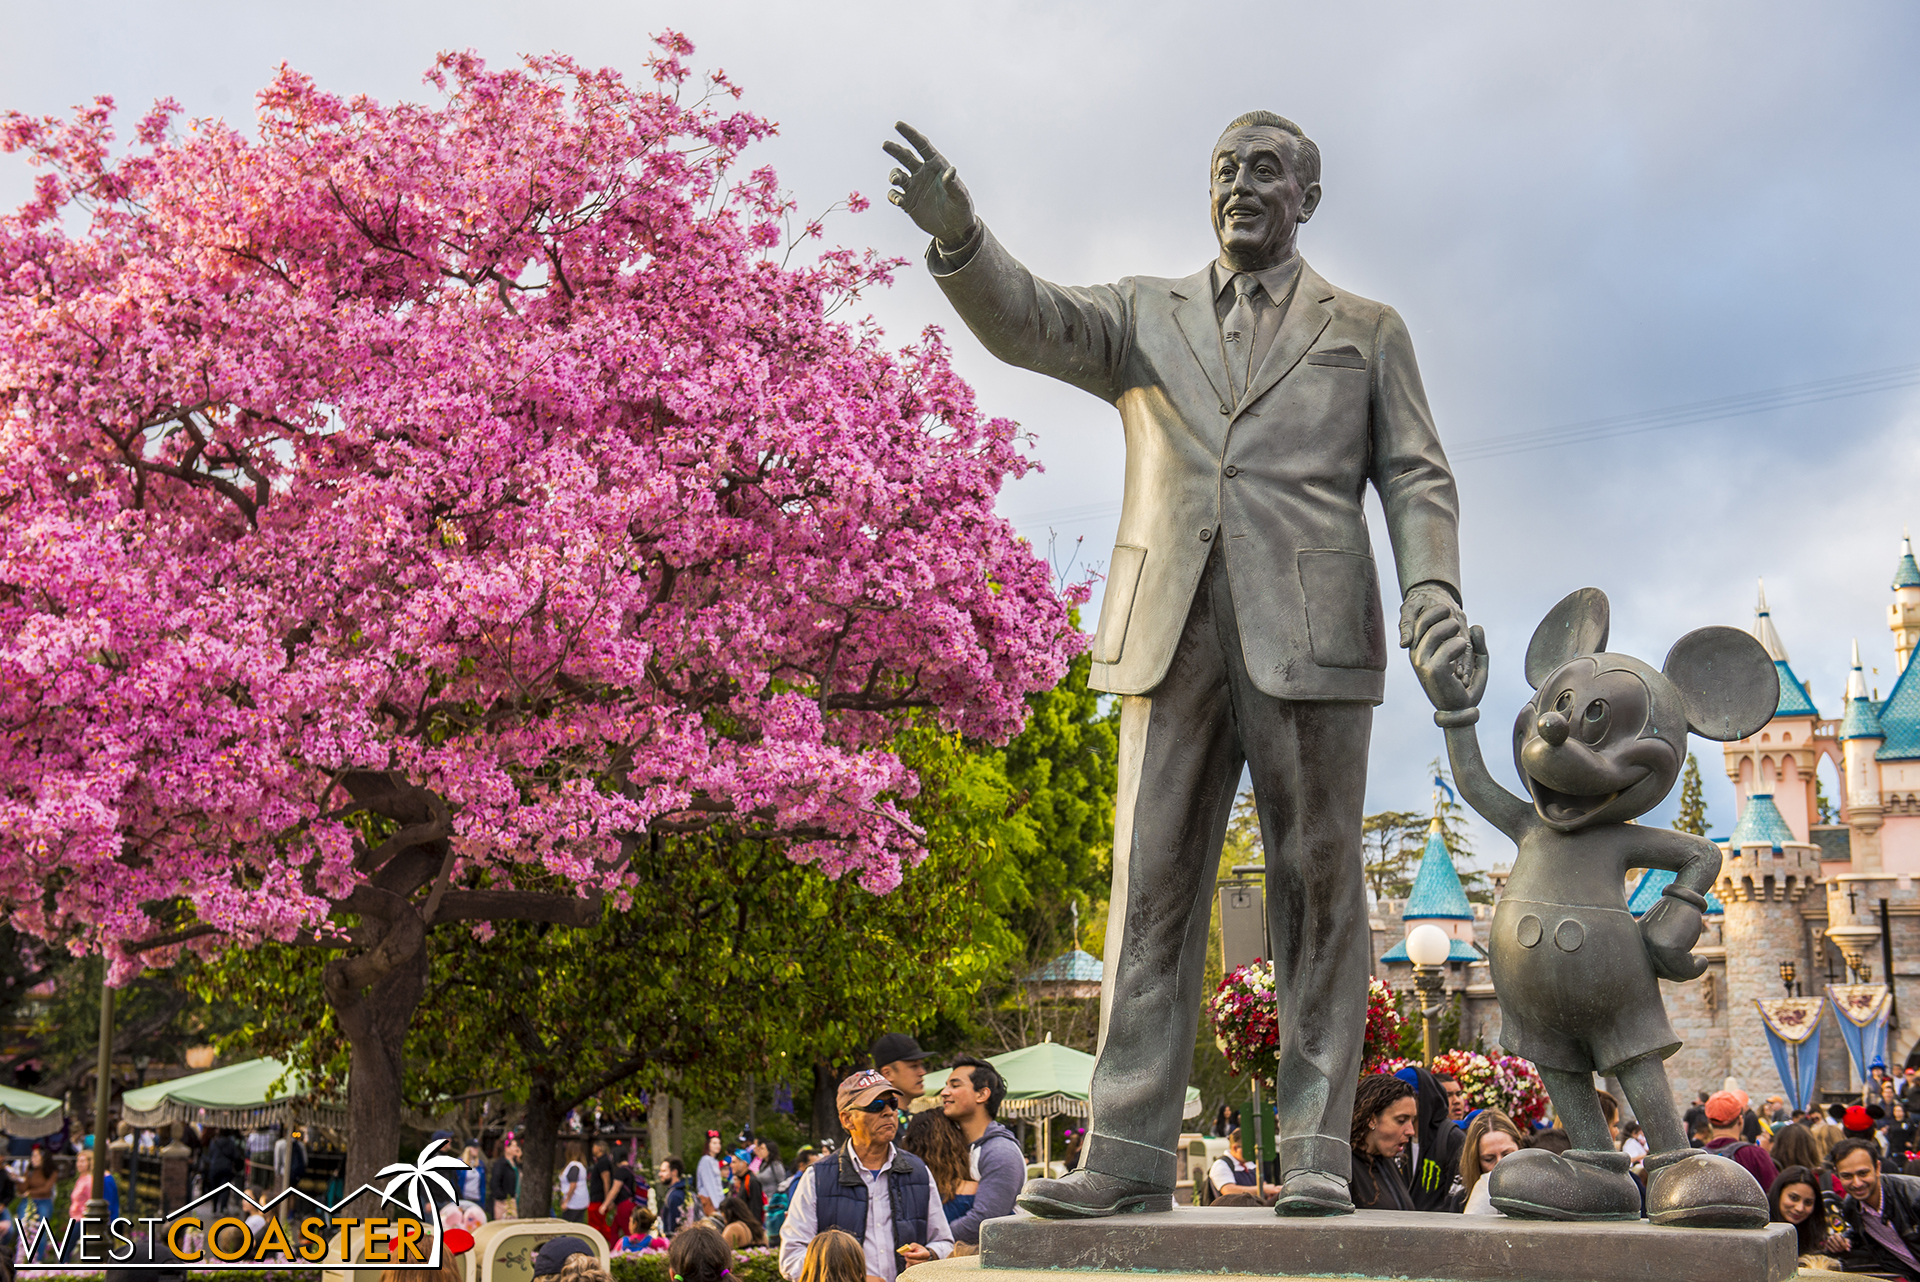  Every year, the tabebuias here form a colorful backdrop that is eagerly awaited by Disney fan photographers. 